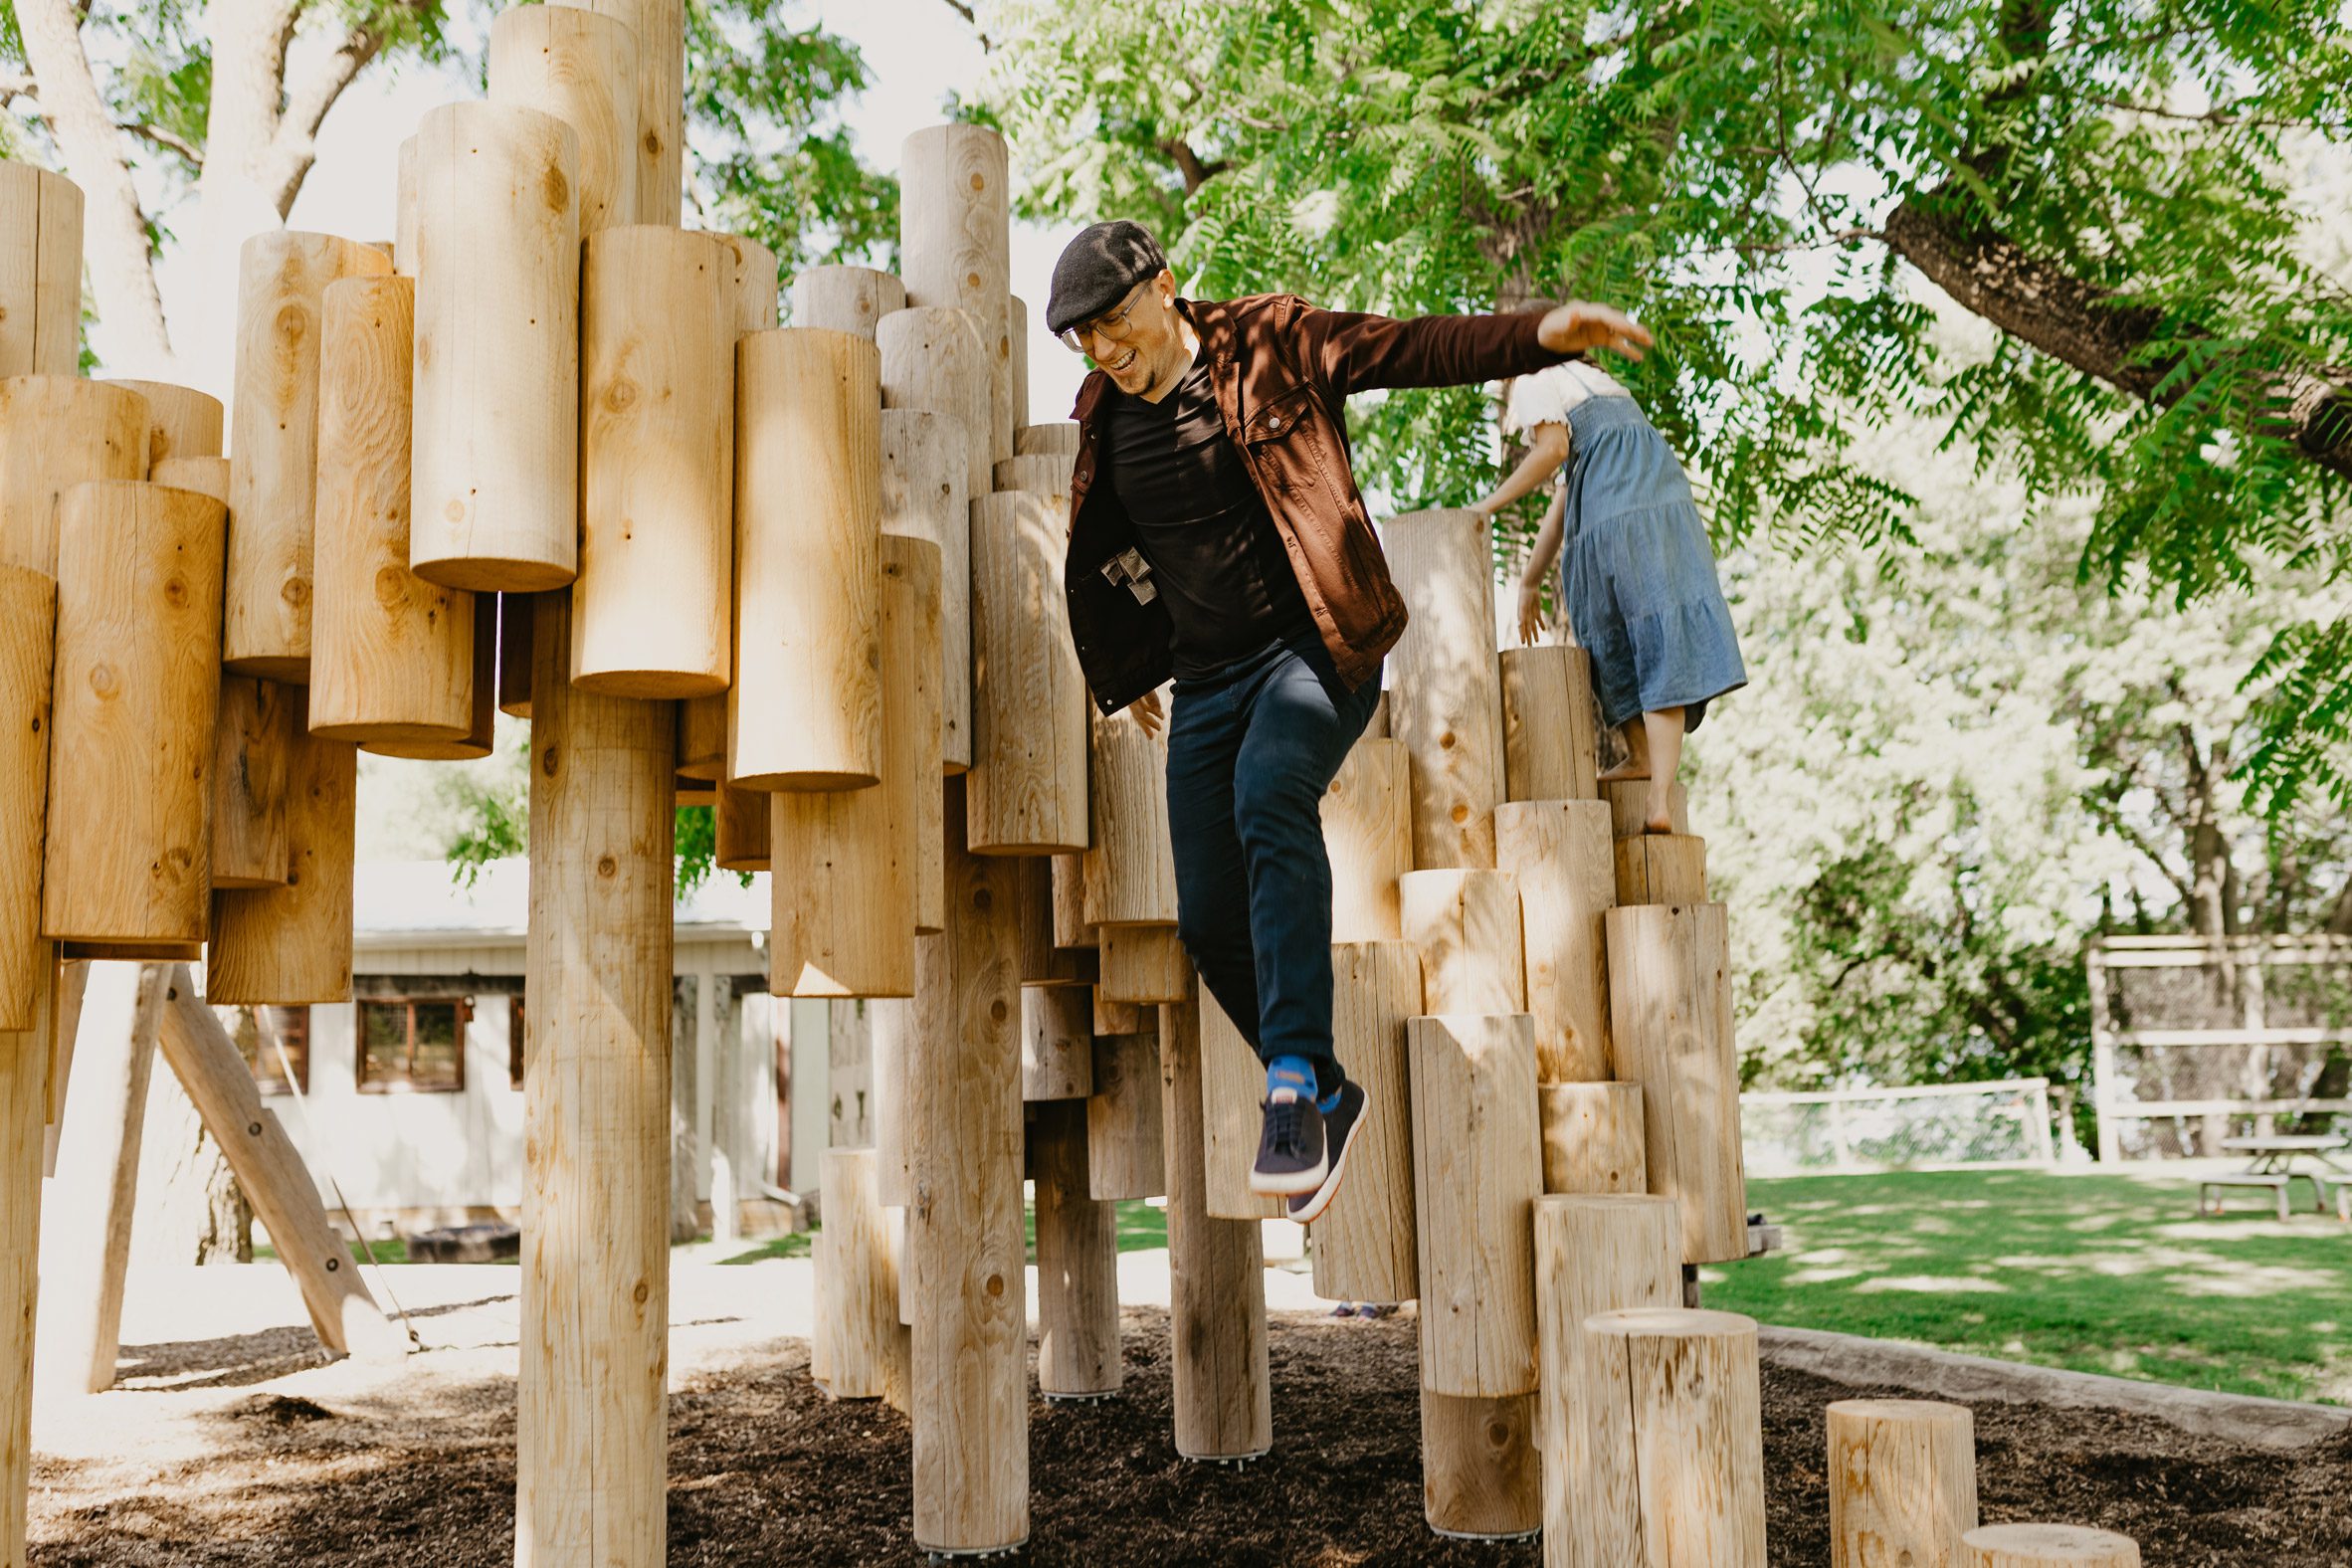 An adult leaping from leaping from a playground sculpture made of logs